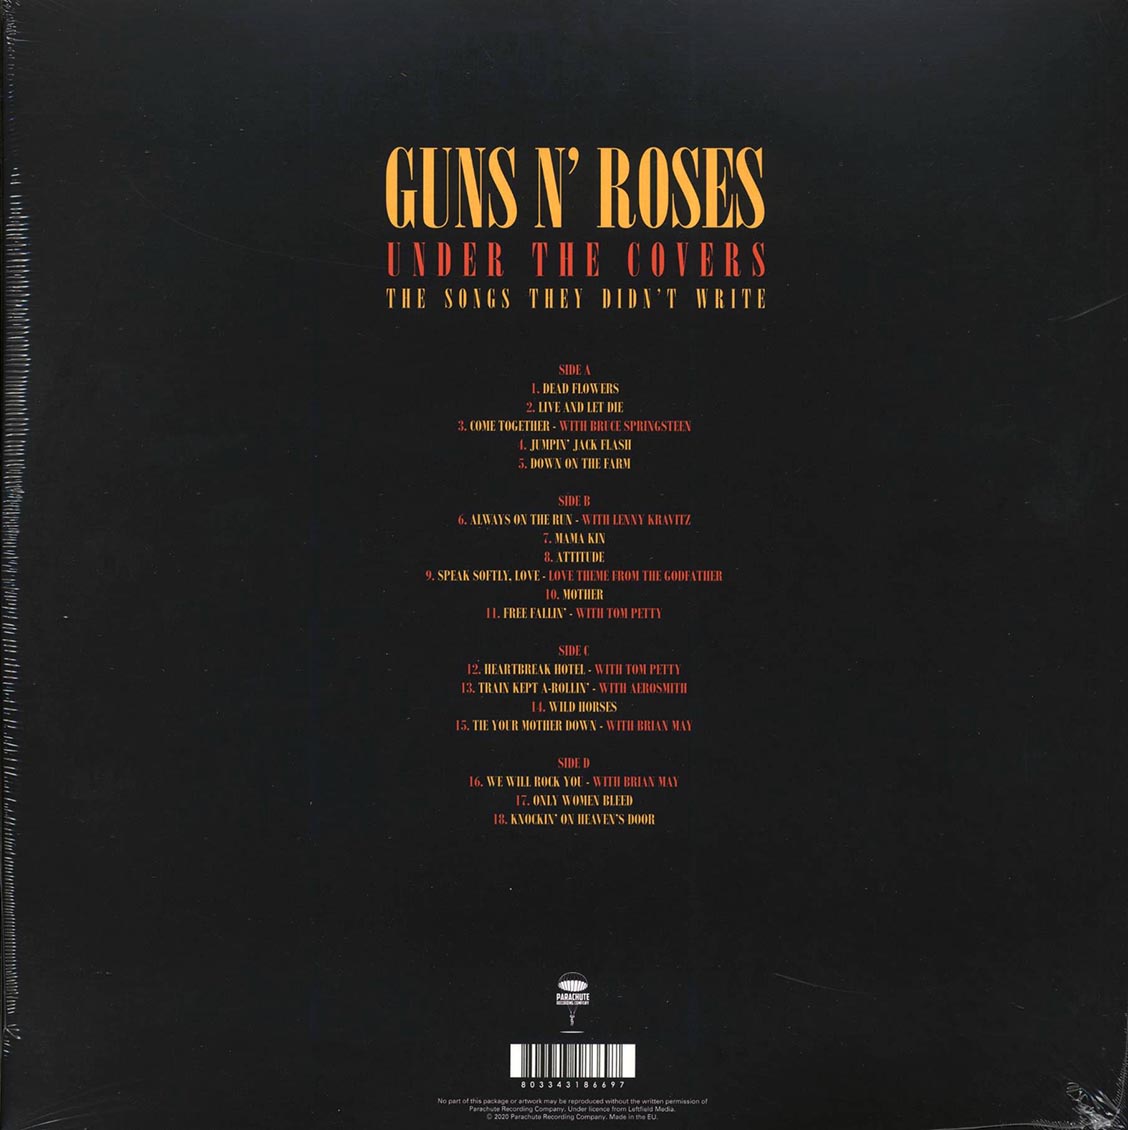 Guns N' Roses - Under The Covers: The Songs They Didn't Write